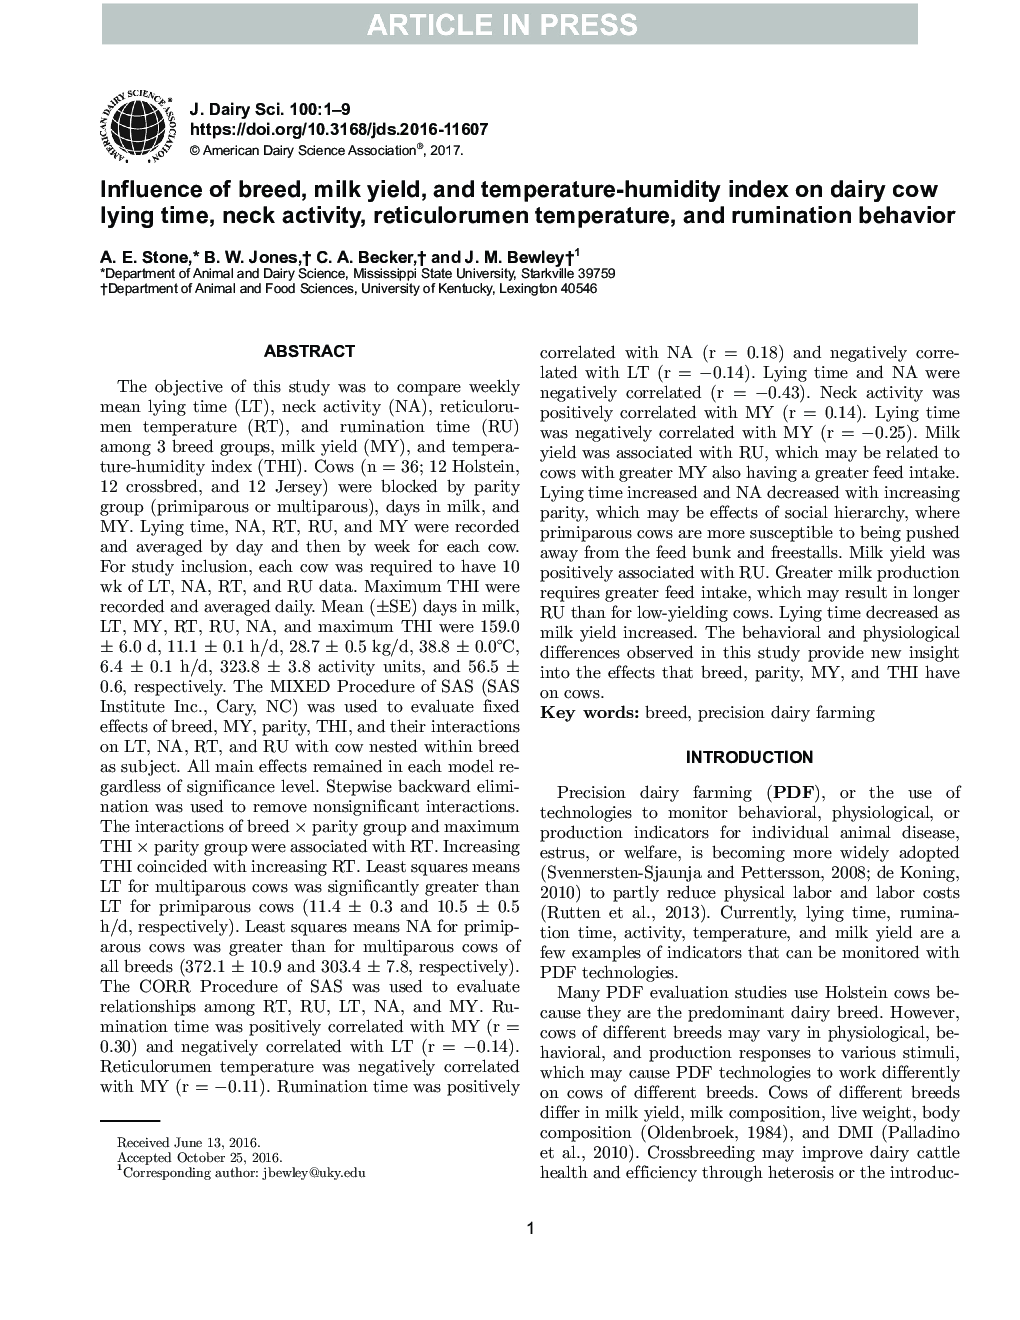 Influence of breed, milk yield, and temperature-humidity index on dairy cow lying time, neck activity, reticulorumen temperature, and rumination behavior